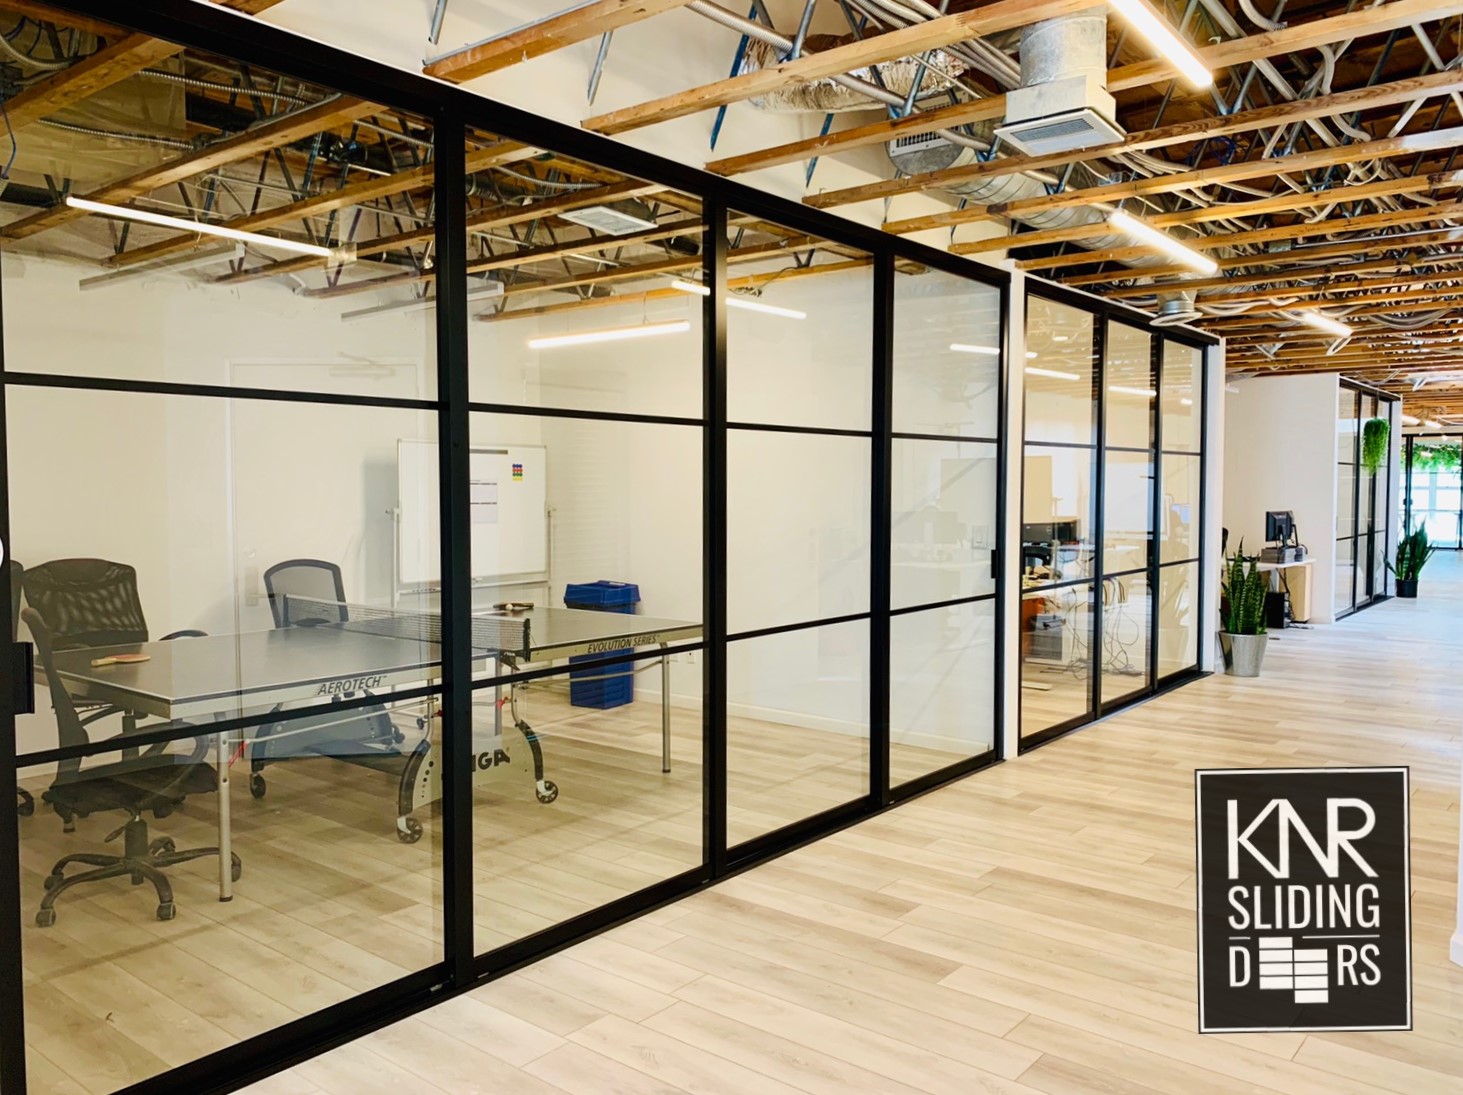 Modern office space featuring a glass-walled conference room with exposed ceiling beams and sleek glass interior doors.